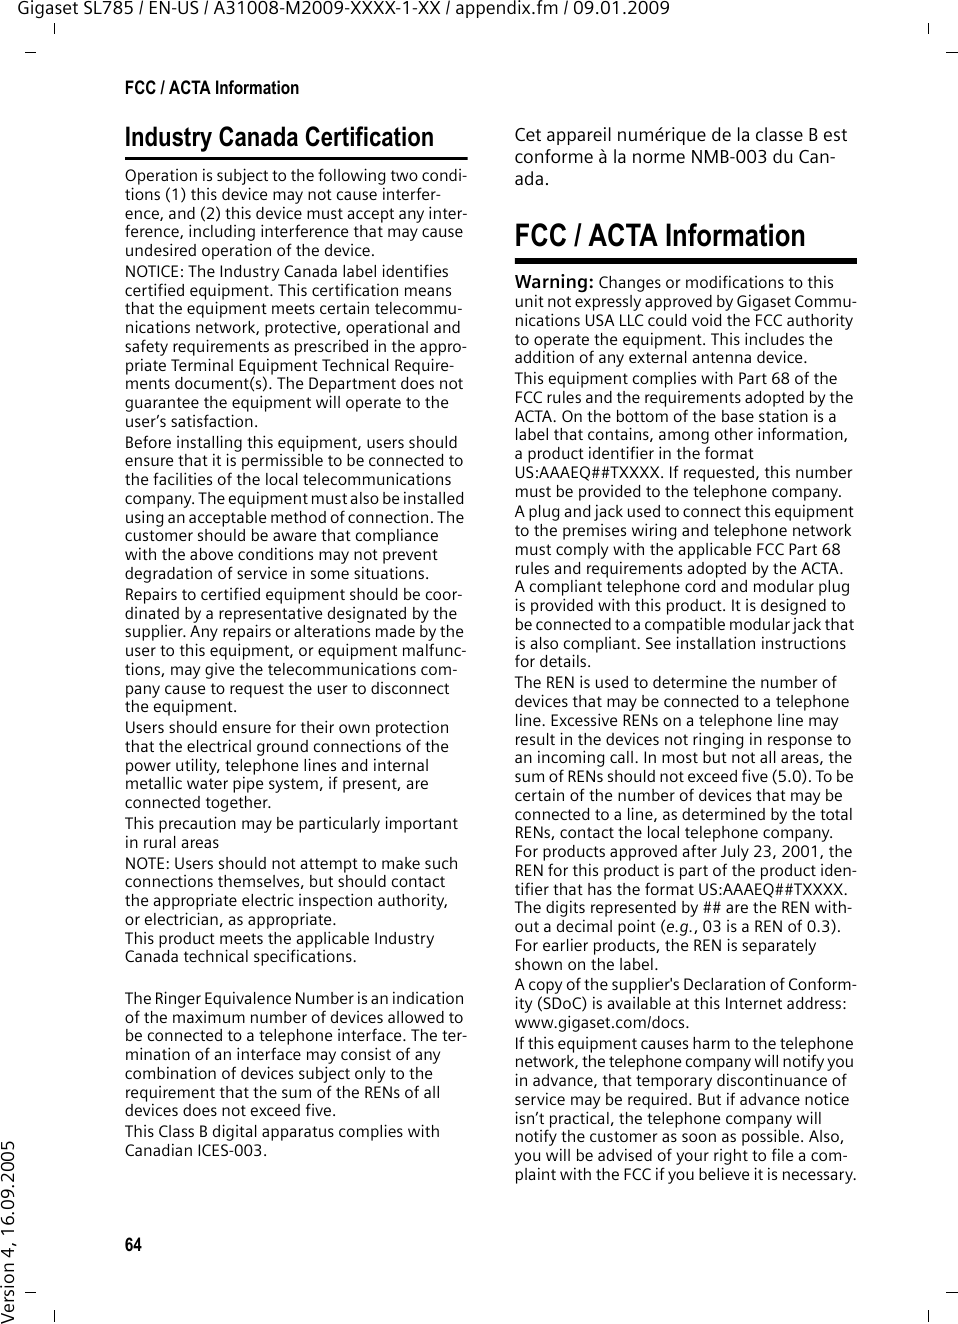 64FCC / ACTA InformationGigaset SL785 / EN-US / A31008-M2009-XXXX-1-XX / appendix.fm / 09.01.2009Version 4, 16.09.2005Industry Canada CertificationOperation is subject to the following two condi-tions (1) this device may not cause interfer-ence, and (2) this device must accept any inter-ference, including interference that may cause undesired operation of the device.NOTICE: The Industry Canada label identifies certified equipment. This certification means that the equipment meets certain telecommu-nications network, protective, operational and safety requirements as prescribed in the appro-priate Terminal Equipment Technical Require-ments document(s). The Department does not guarantee the equipment will operate to the user’s satisfaction.Before installing this equipment, users should ensure that it is permissible to be connected to the facilities of the local telecommunications company. The equipment must also be installed using an acceptable method of connection. The customer should be aware that compliance with the above conditions may not prevent degradation of service in some situations.Repairs to certified equipment should be coor-dinated by a representative designated by the supplier. Any repairs or alterations made by the user to this equipment, or equipment malfunc-tions, may give the telecommunications com-pany cause to request the user to disconnect the equipment.Users should ensure for their own protection that the electrical ground connections of the power utility, telephone lines and internal metallic water pipe system, if present, are connected together.This precaution may be particularly important in rural areasNOTE: Users should not attempt to make such connections themselves, but should contact the appropriate electric inspection authority, or electrician, as appropriate.This product meets the applicable Industry Canada technical specifications.The Ringer Equivalence Number is an indication of the maximum number of devices allowed to be connected to a telephone interface. The ter-mination of an interface may consist of any combination of devices subject only to the requirement that the sum of the RENs of all devices does not exceed five.This Class B digital apparatus complies with Canadian ICES-003.Cet appareil numérique de la classe B est conforme à la norme NMB-003 du Can-ada.FCC / ACTA InformationWarning: Changes or modifications to this unit not expressly approved by Gigaset Commu-nications USA LLC could void the FCC authority to operate the equipment. This includes the addition of any external antenna device.This equipment complies with Part 68 of the FCC rules and the requirements adopted by the ACTA. On the bottom of the base station is a label that contains, among other information, a product identifier in the format US:AAAEQ##TXXXX. If requested, this number must be provided to the telephone company.A plug and jack used to connect this equipment to the premises wiring and telephone network must comply with the applicable FCC Part 68 rules and requirements adopted by the ACTA. A compliant telephone cord and modular plug is provided with this product. It is designed to be connected to a compatible modular jack that is also compliant. See installation instructions for details.The REN is used to determine the number of devices that may be connected to a telephone line. Excessive RENs on a telephone line may result in the devices not ringing in response to an incoming call. In most but not all areas, the sum of RENs should not exceed five (5.0). To be certain of the number of devices that may be connected to a line, as determined by the total RENs, contact the local telephone company. For products approved after July 23, 2001, the REN for this product is part of the product iden-tifier that has the format US:AAAEQ##TXXXX. The digits represented by ## are the REN with-out a decimal point (e.g., 03 is a REN of 0.3). For earlier products, the REN is separately shown on the label.A copy of the supplier&apos;s Declaration of Conform-ity (SDoC) is available at this Internet address: www.gigaset.com/docs.If this equipment causes harm to the telephone network, the telephone company will notify you in advance, that temporary discontinuance of service may be required. But if advance notice isn’t practical, the telephone company will notify the customer as soon as possible. Also, you will be advised of your right to file a com-plaint with the FCC if you believe it is necessary.